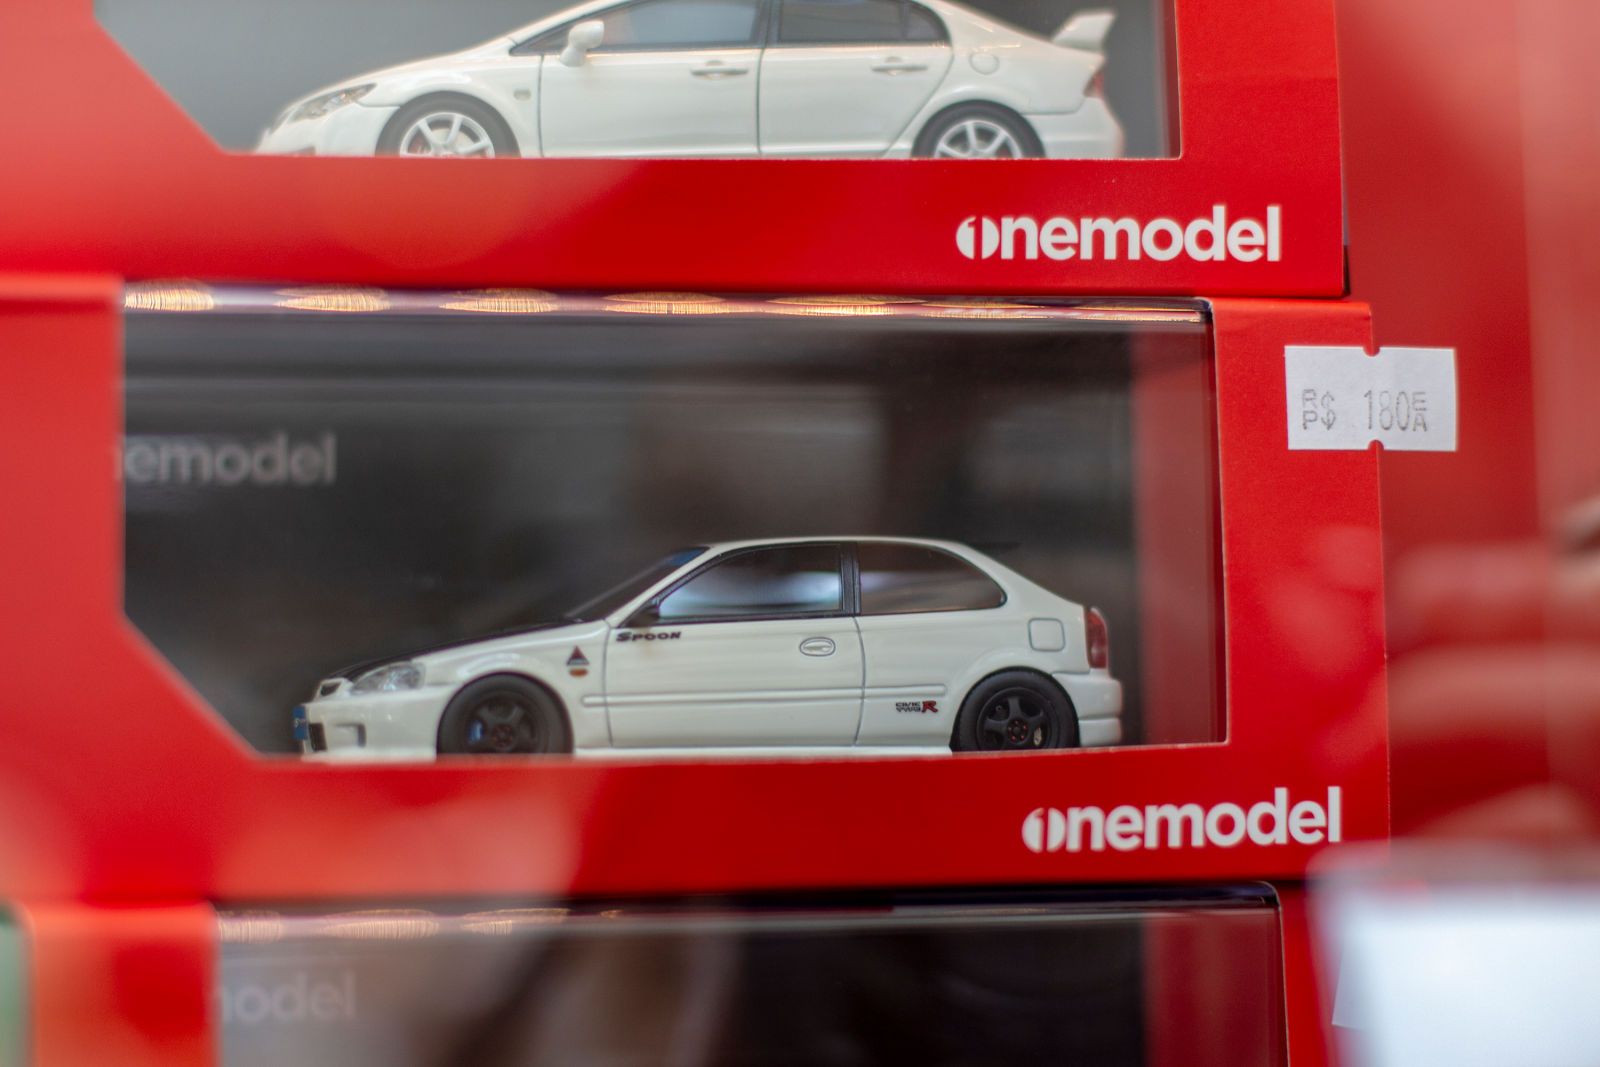 My last stop was at vendor who had a huge glass case of OneModel and GT Spirits. This Civic Type R is a 1:43 model.